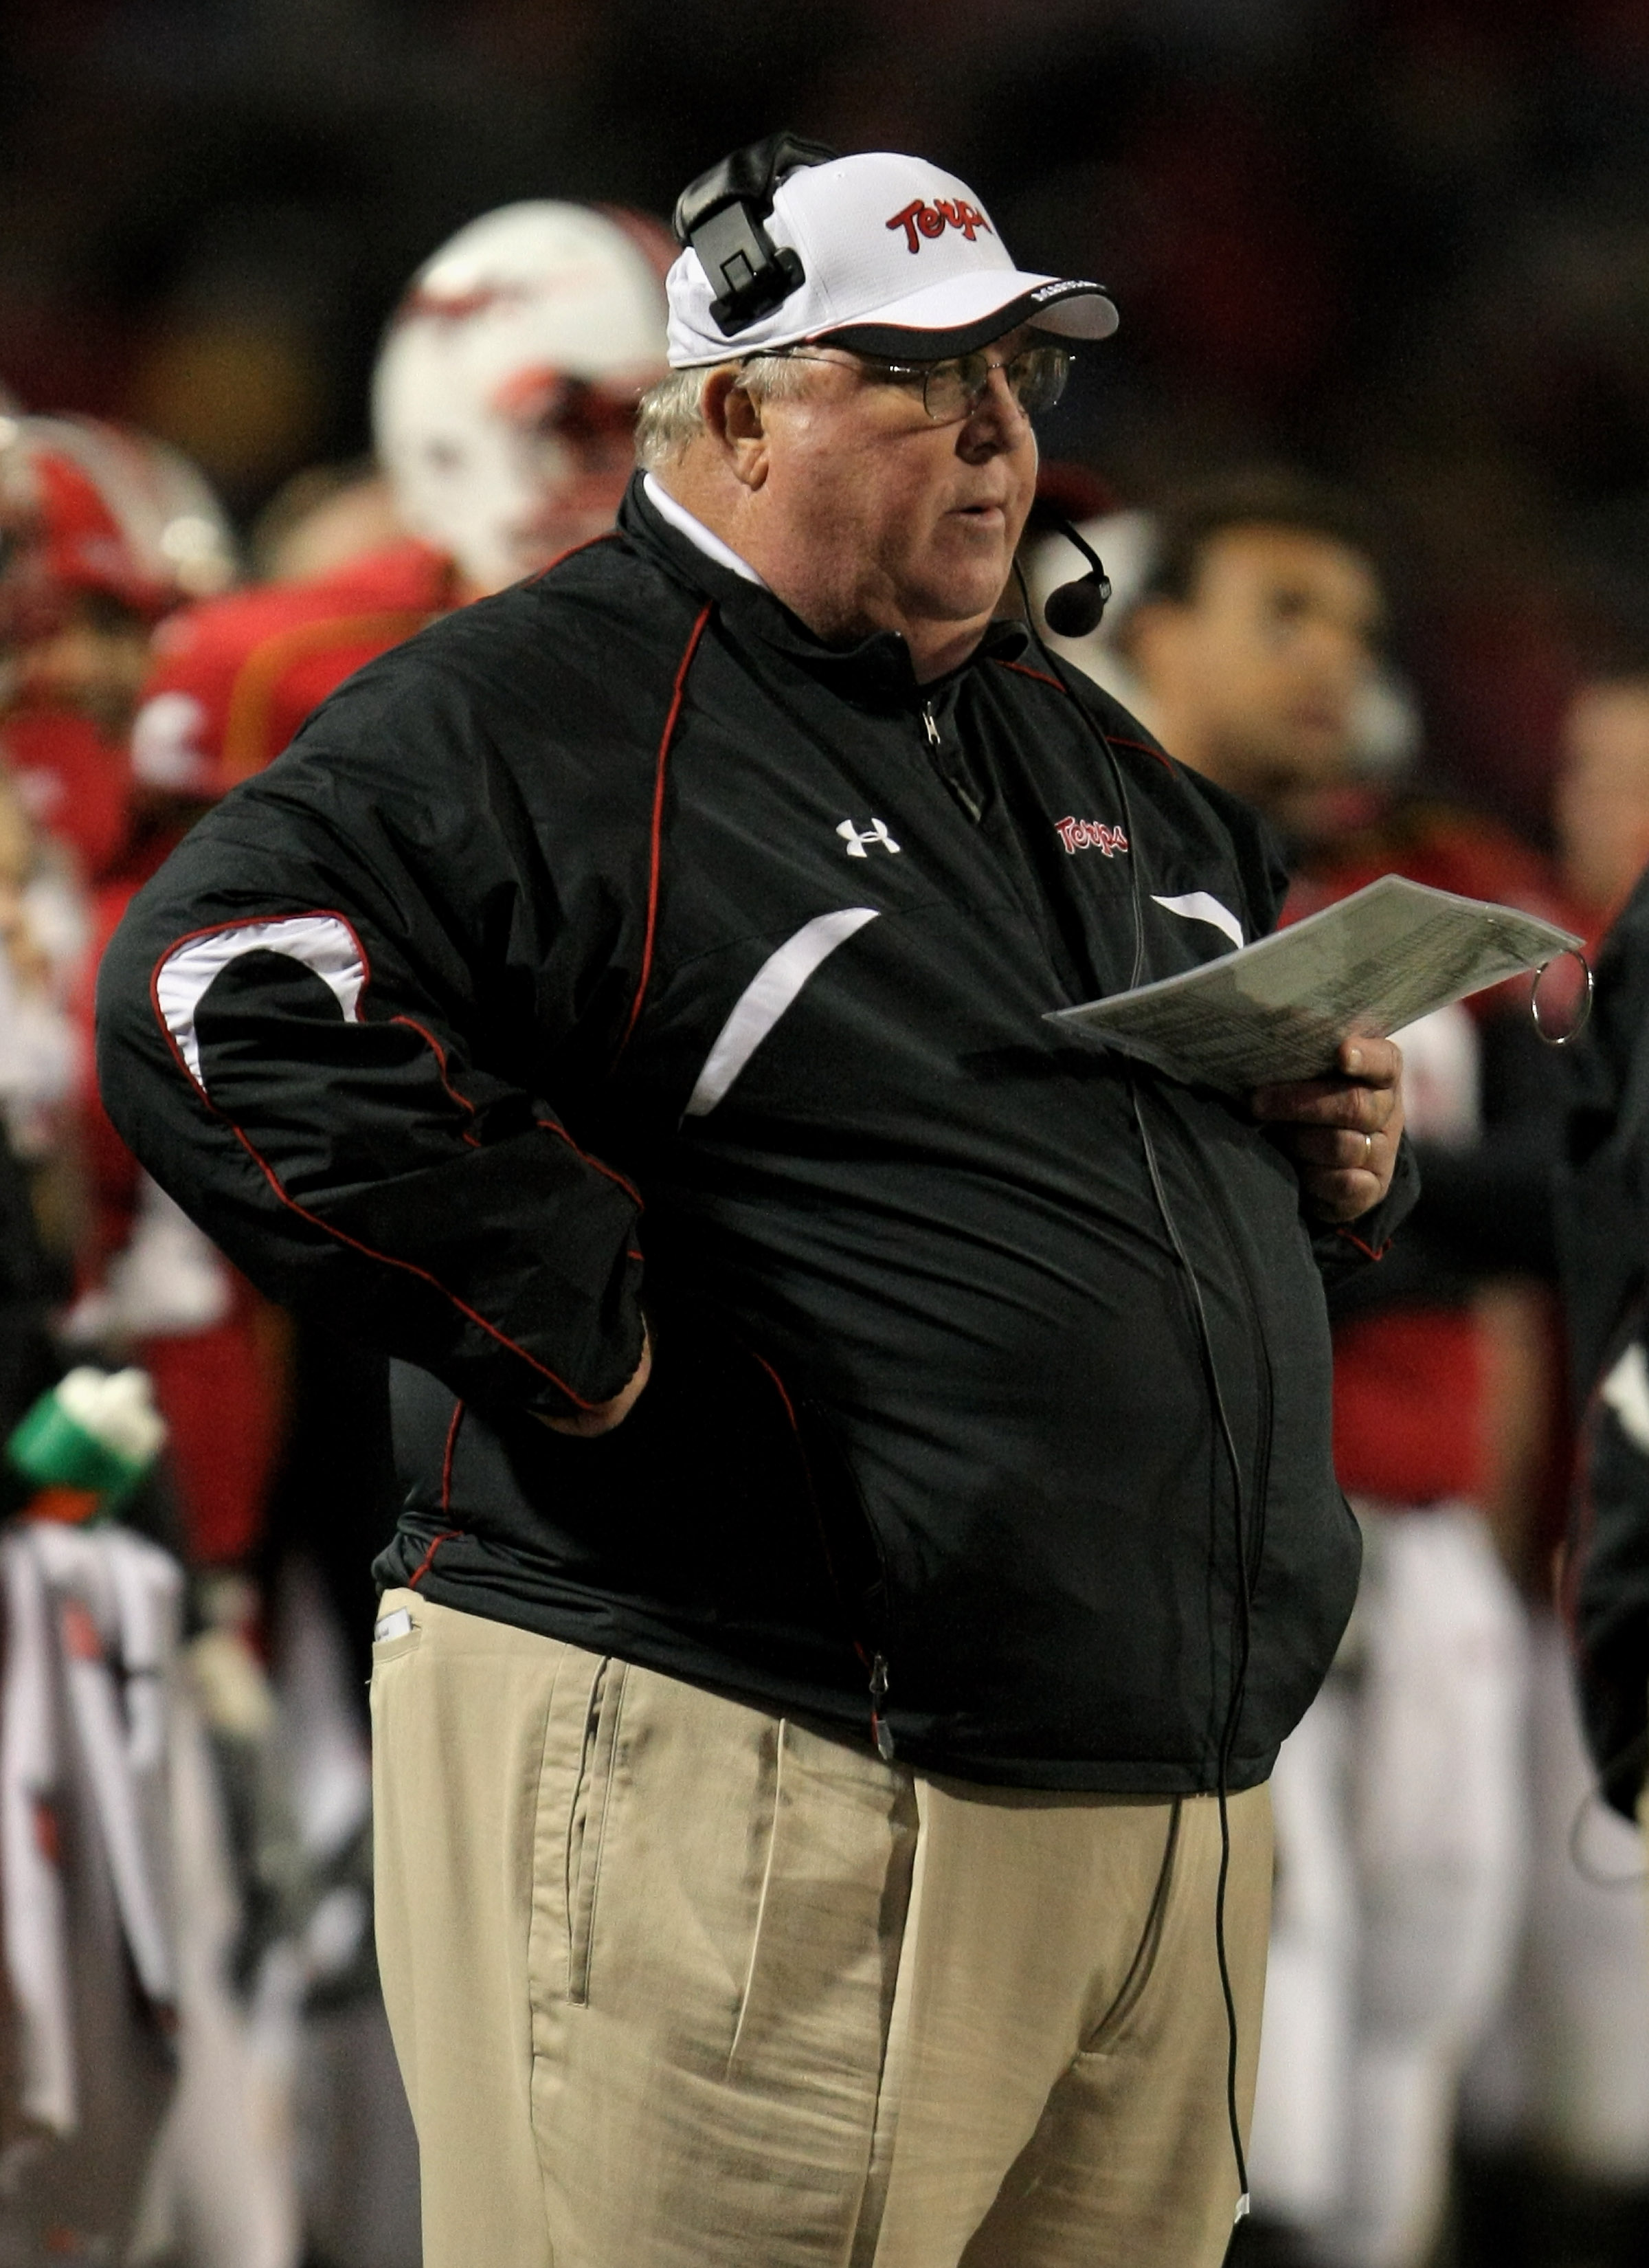 COLLEGE PARK, MD - NOVEMBER 10:  Head coach Ralph Friedgen leads the Maryland Terrapins against the Boston College Eagles at Byrd Stadium on November 10, 2007 in College Park, Maryland.  (Photo by Doug Pensinger/Getty Images)